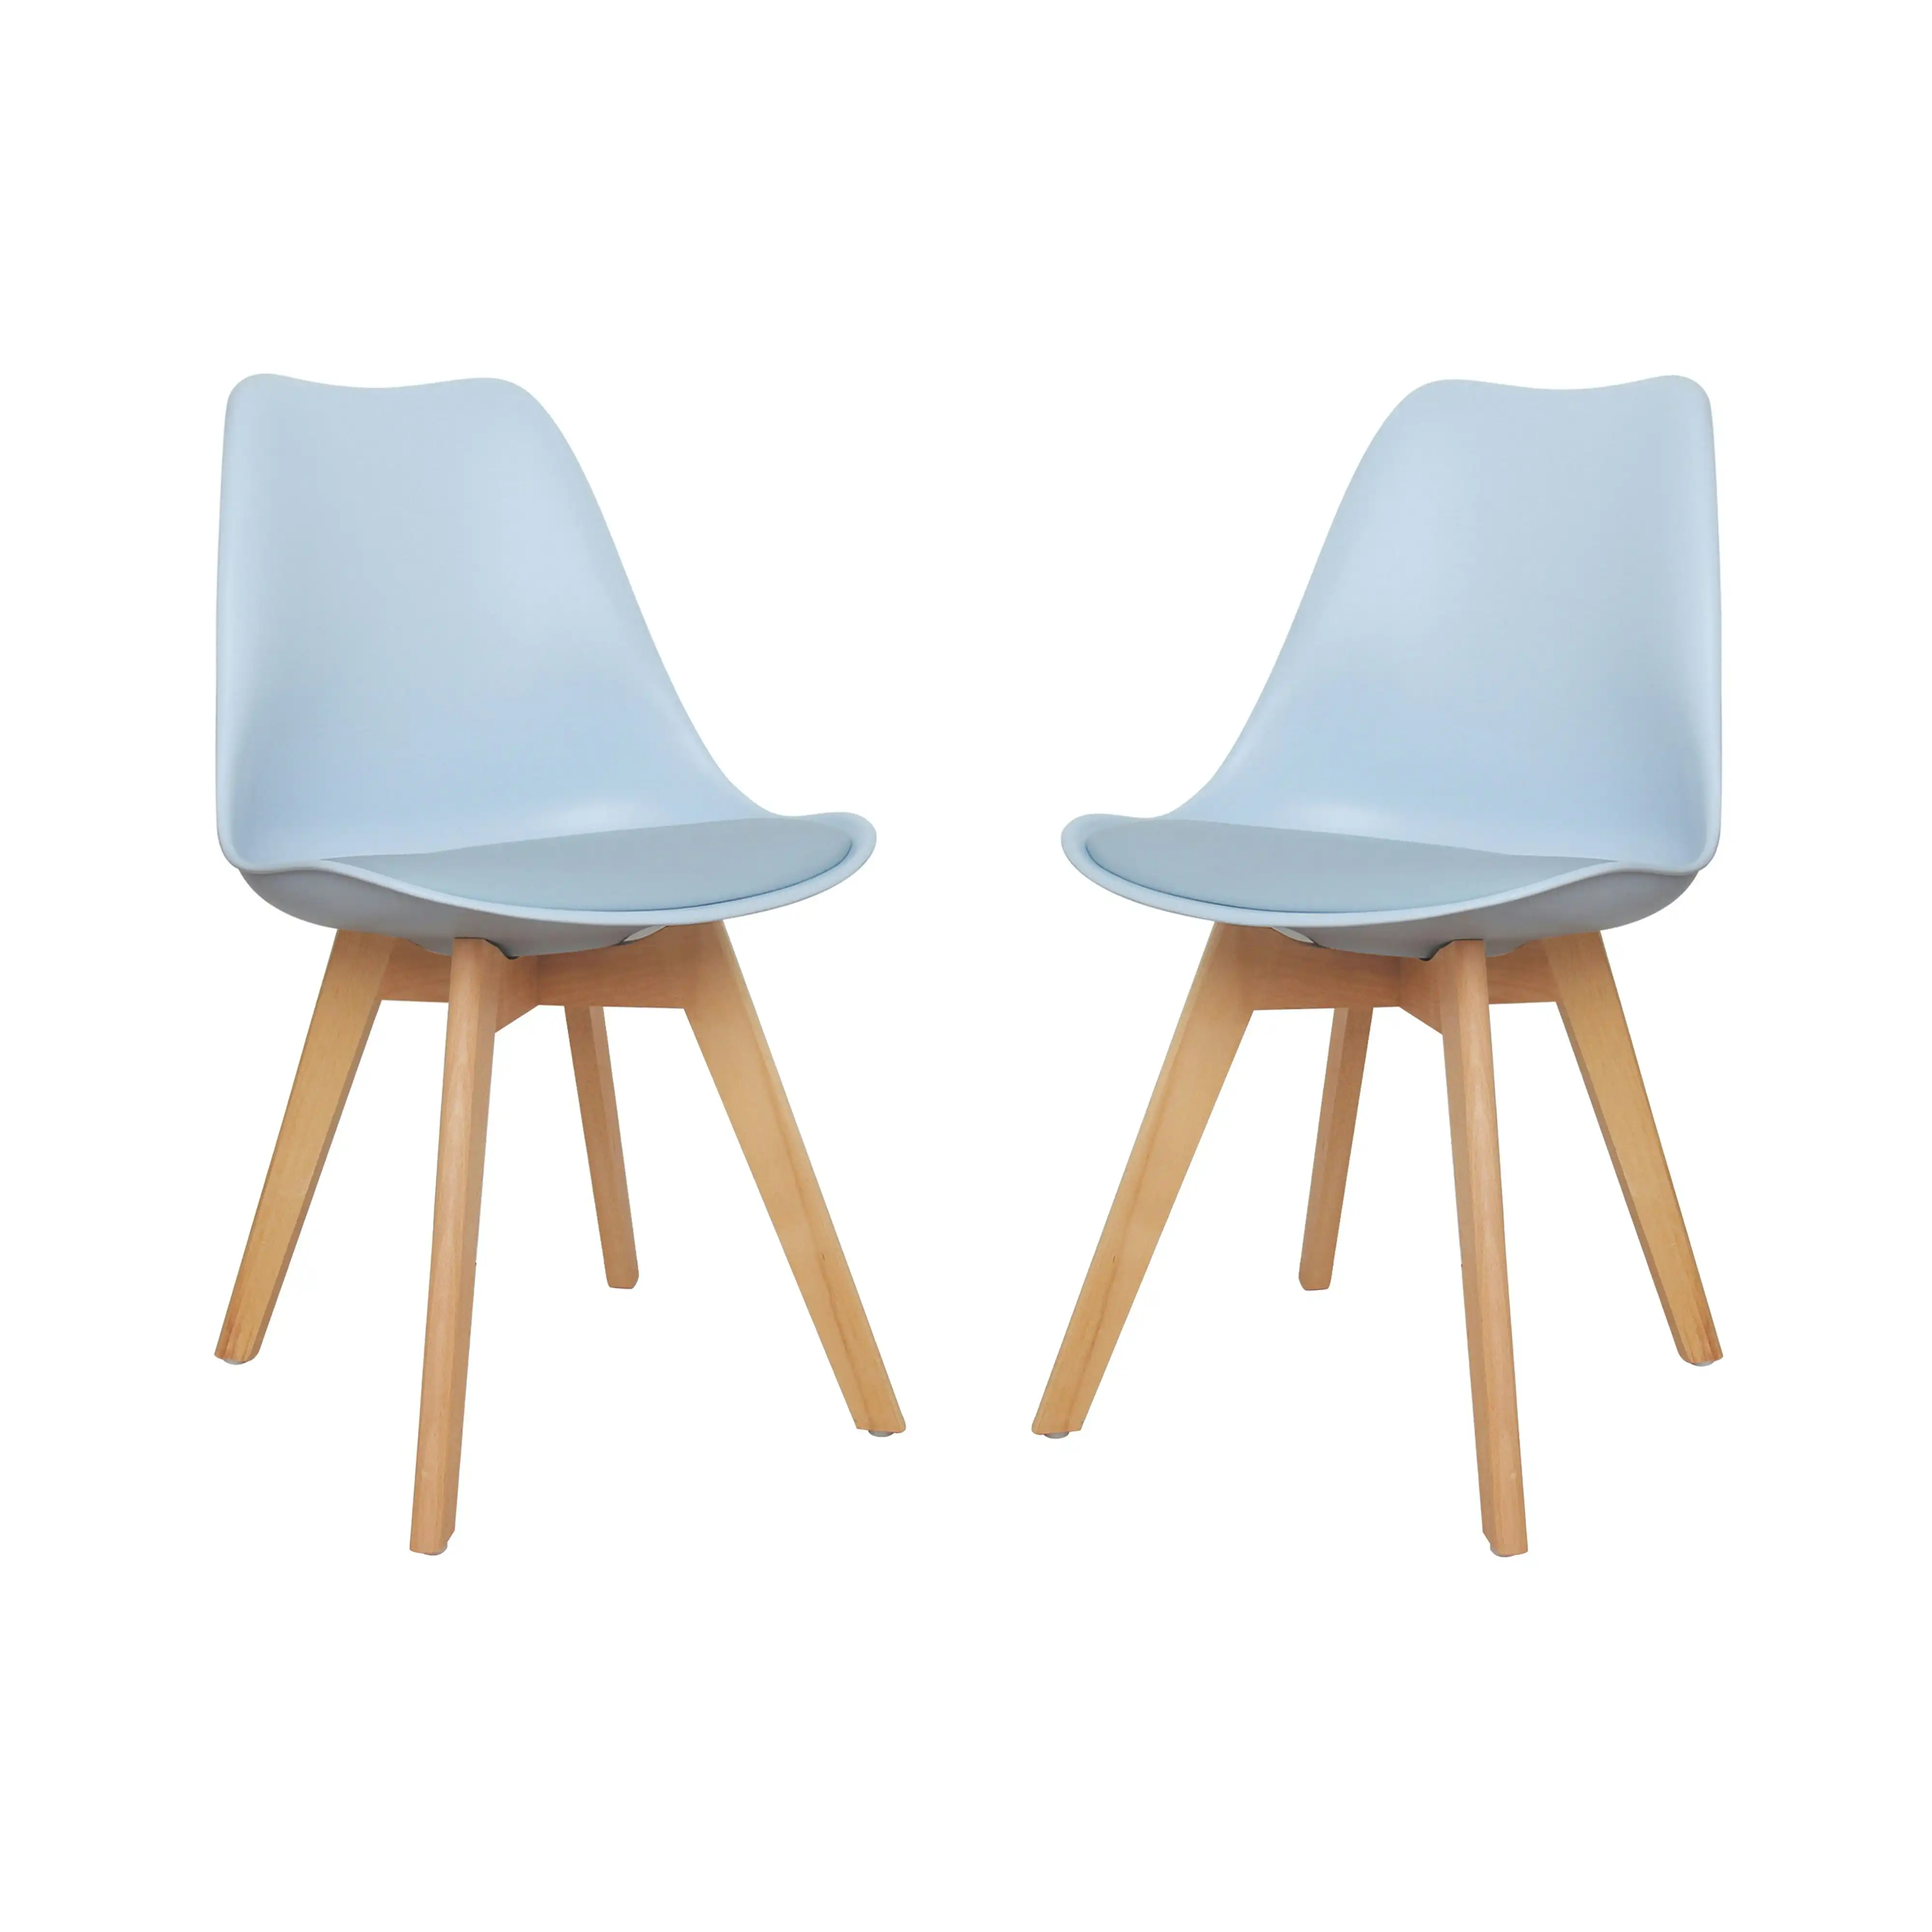 Chotto - Ando Dining Chairs - Baby Blue x 2